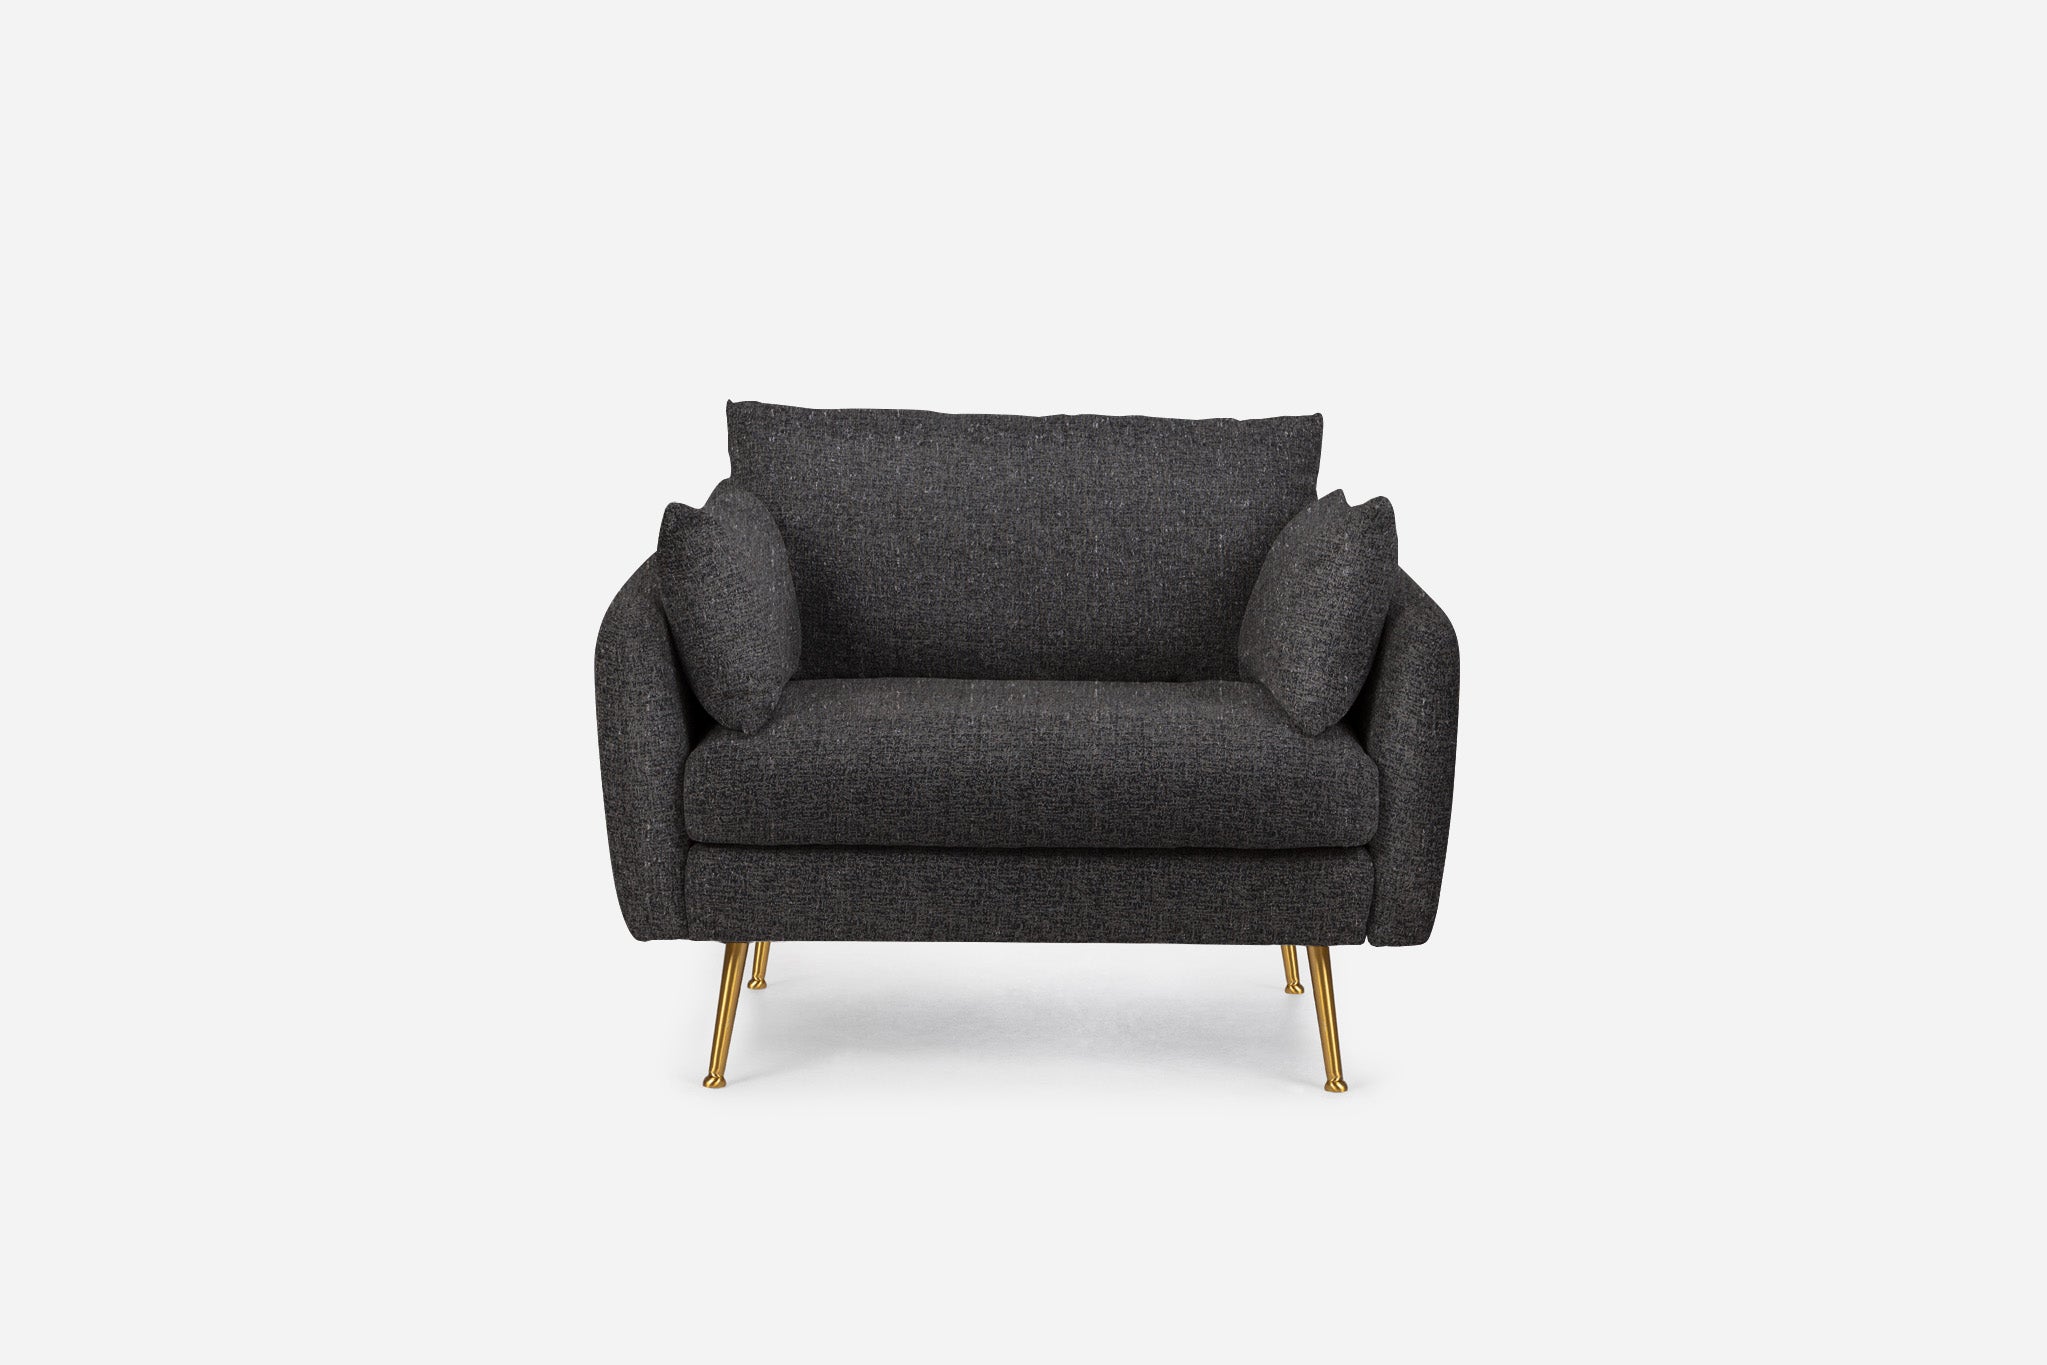 park armchair shown in charcoal with gold legs